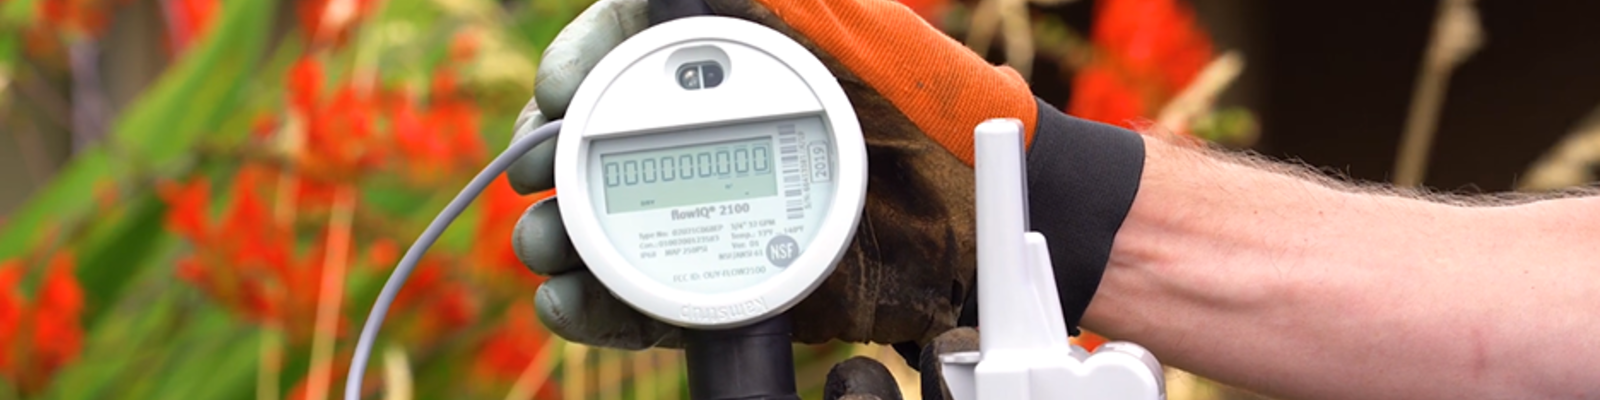 Hand holding a smart water meter ratio transmitter device